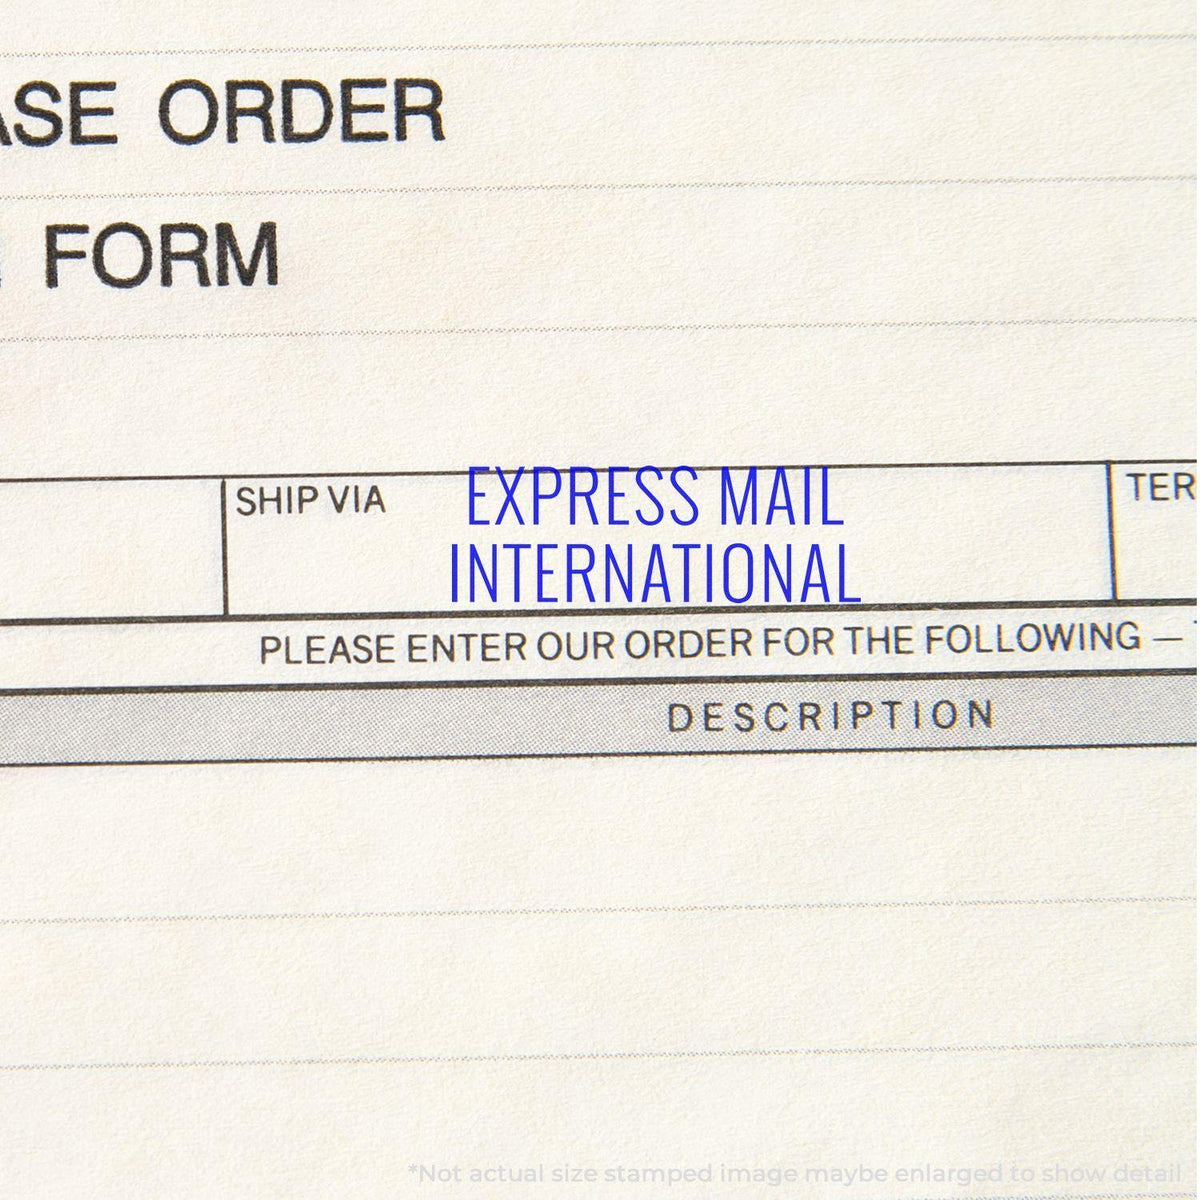 In Use Slim Pre-Inked Express Mail International Stamp Image